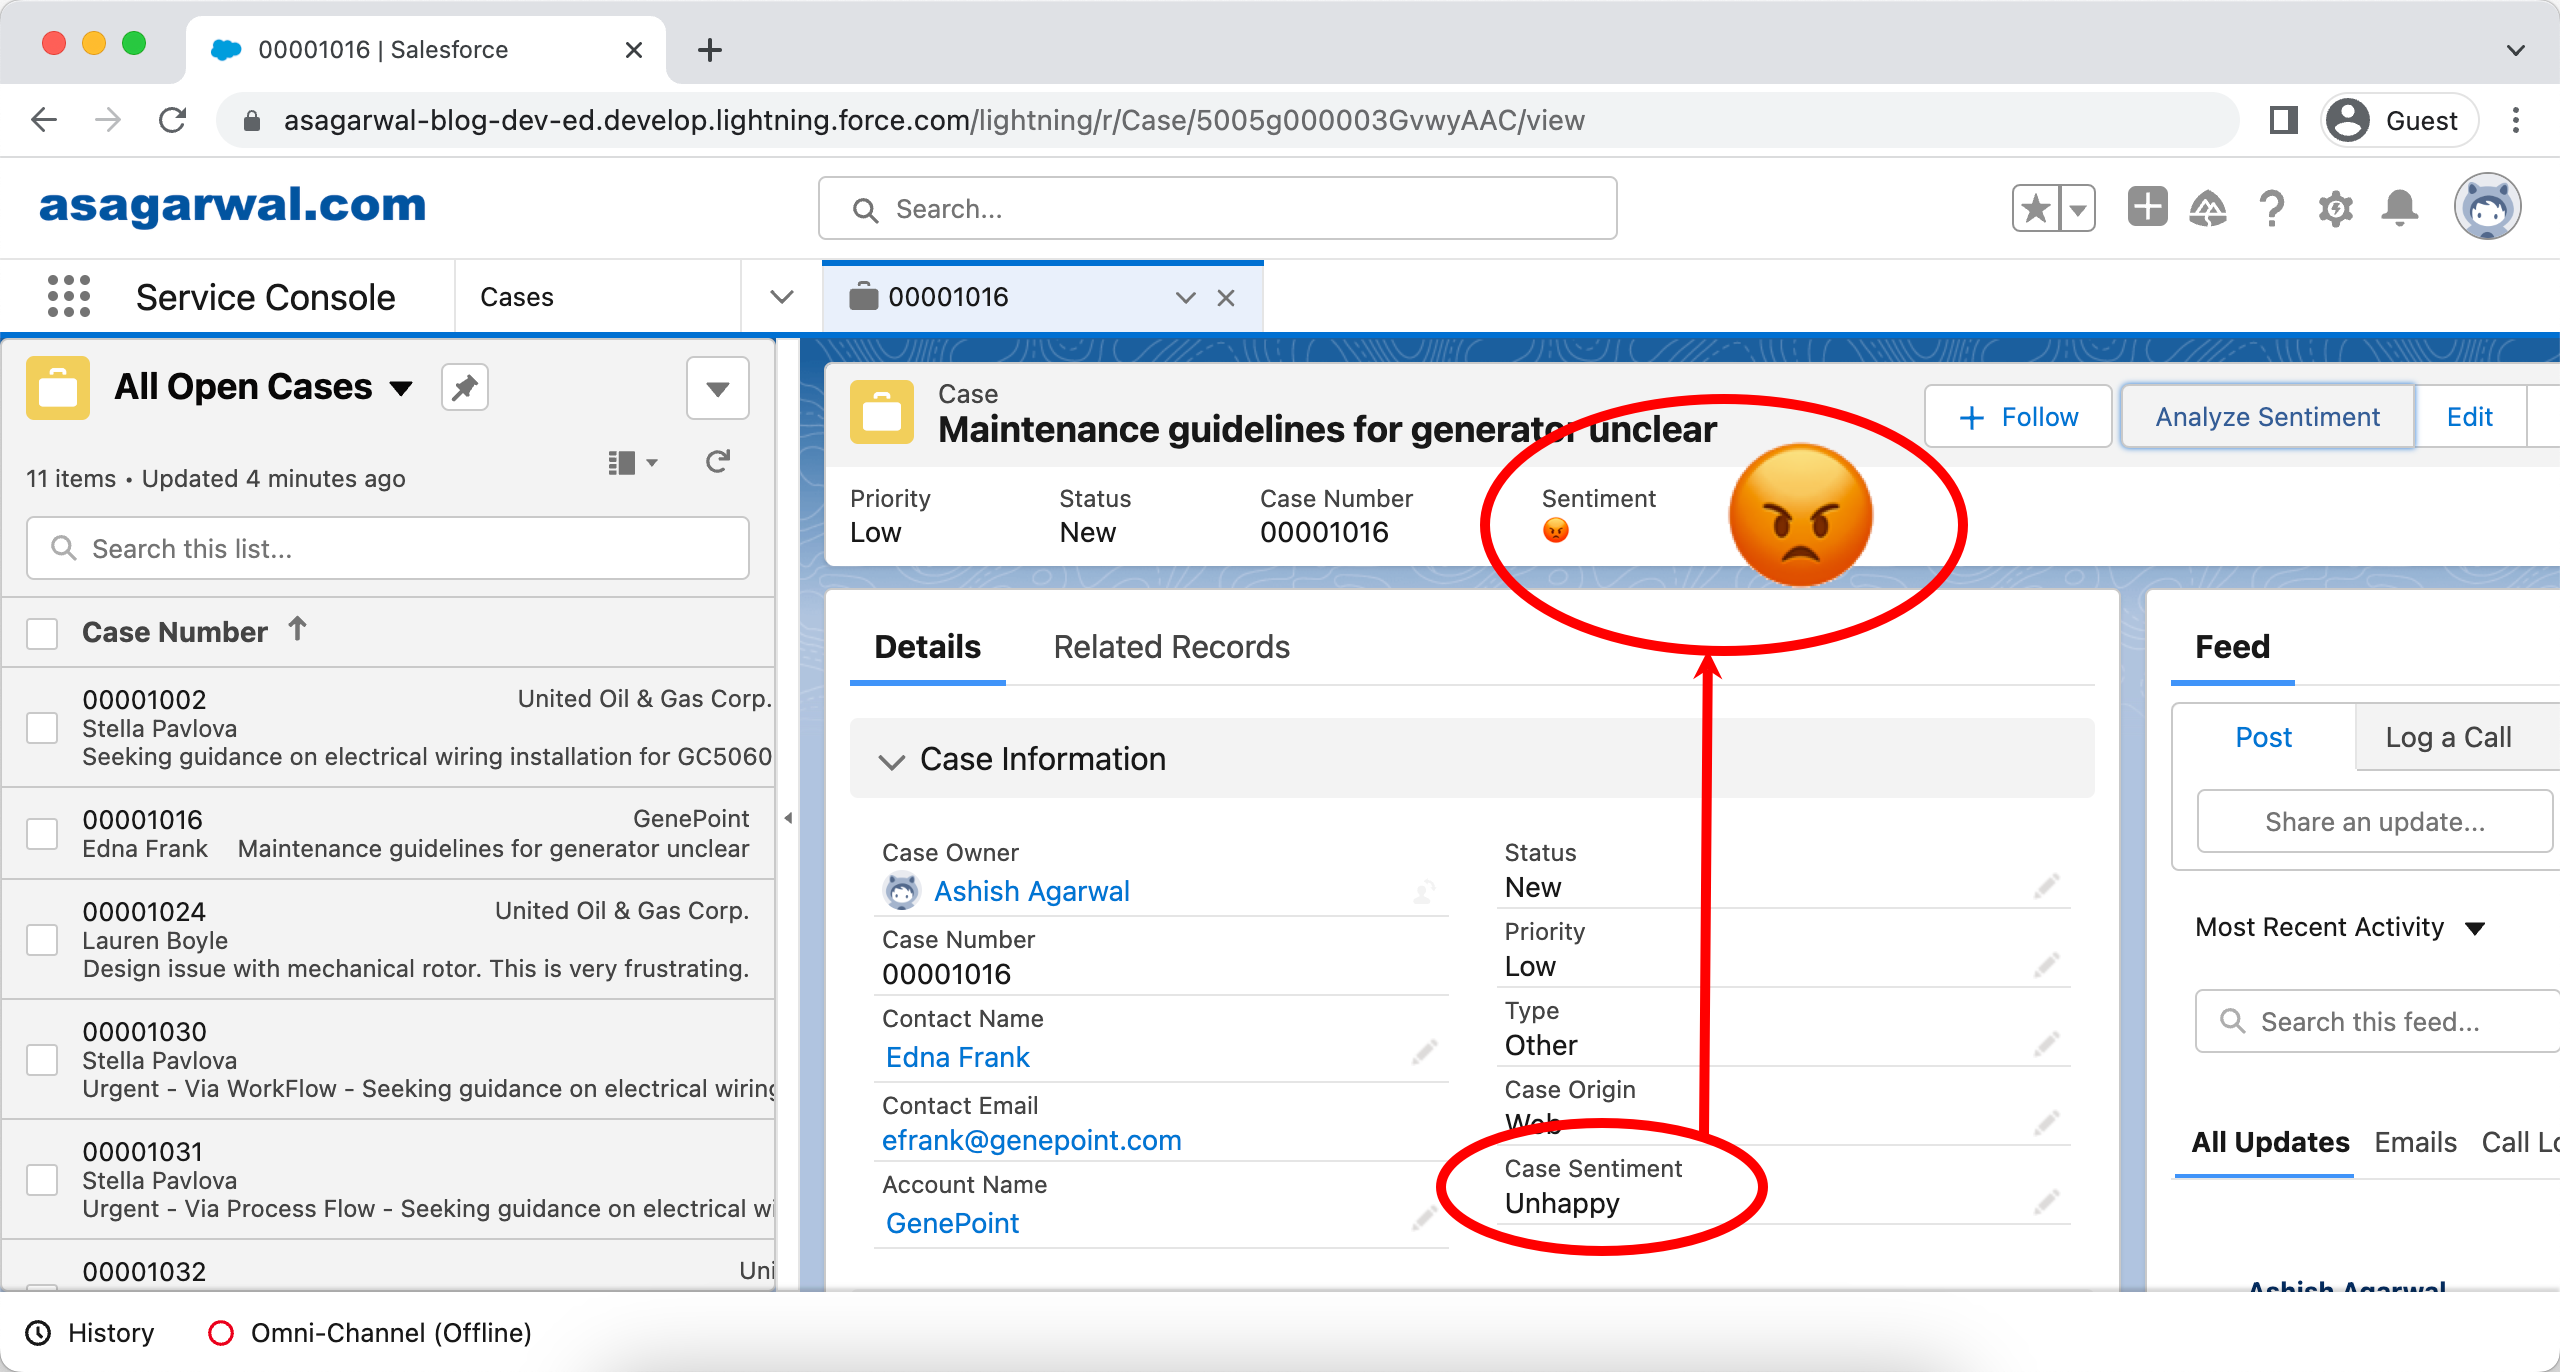 How to Detect the Sentiment of Your Customers on Cases in Salesforce